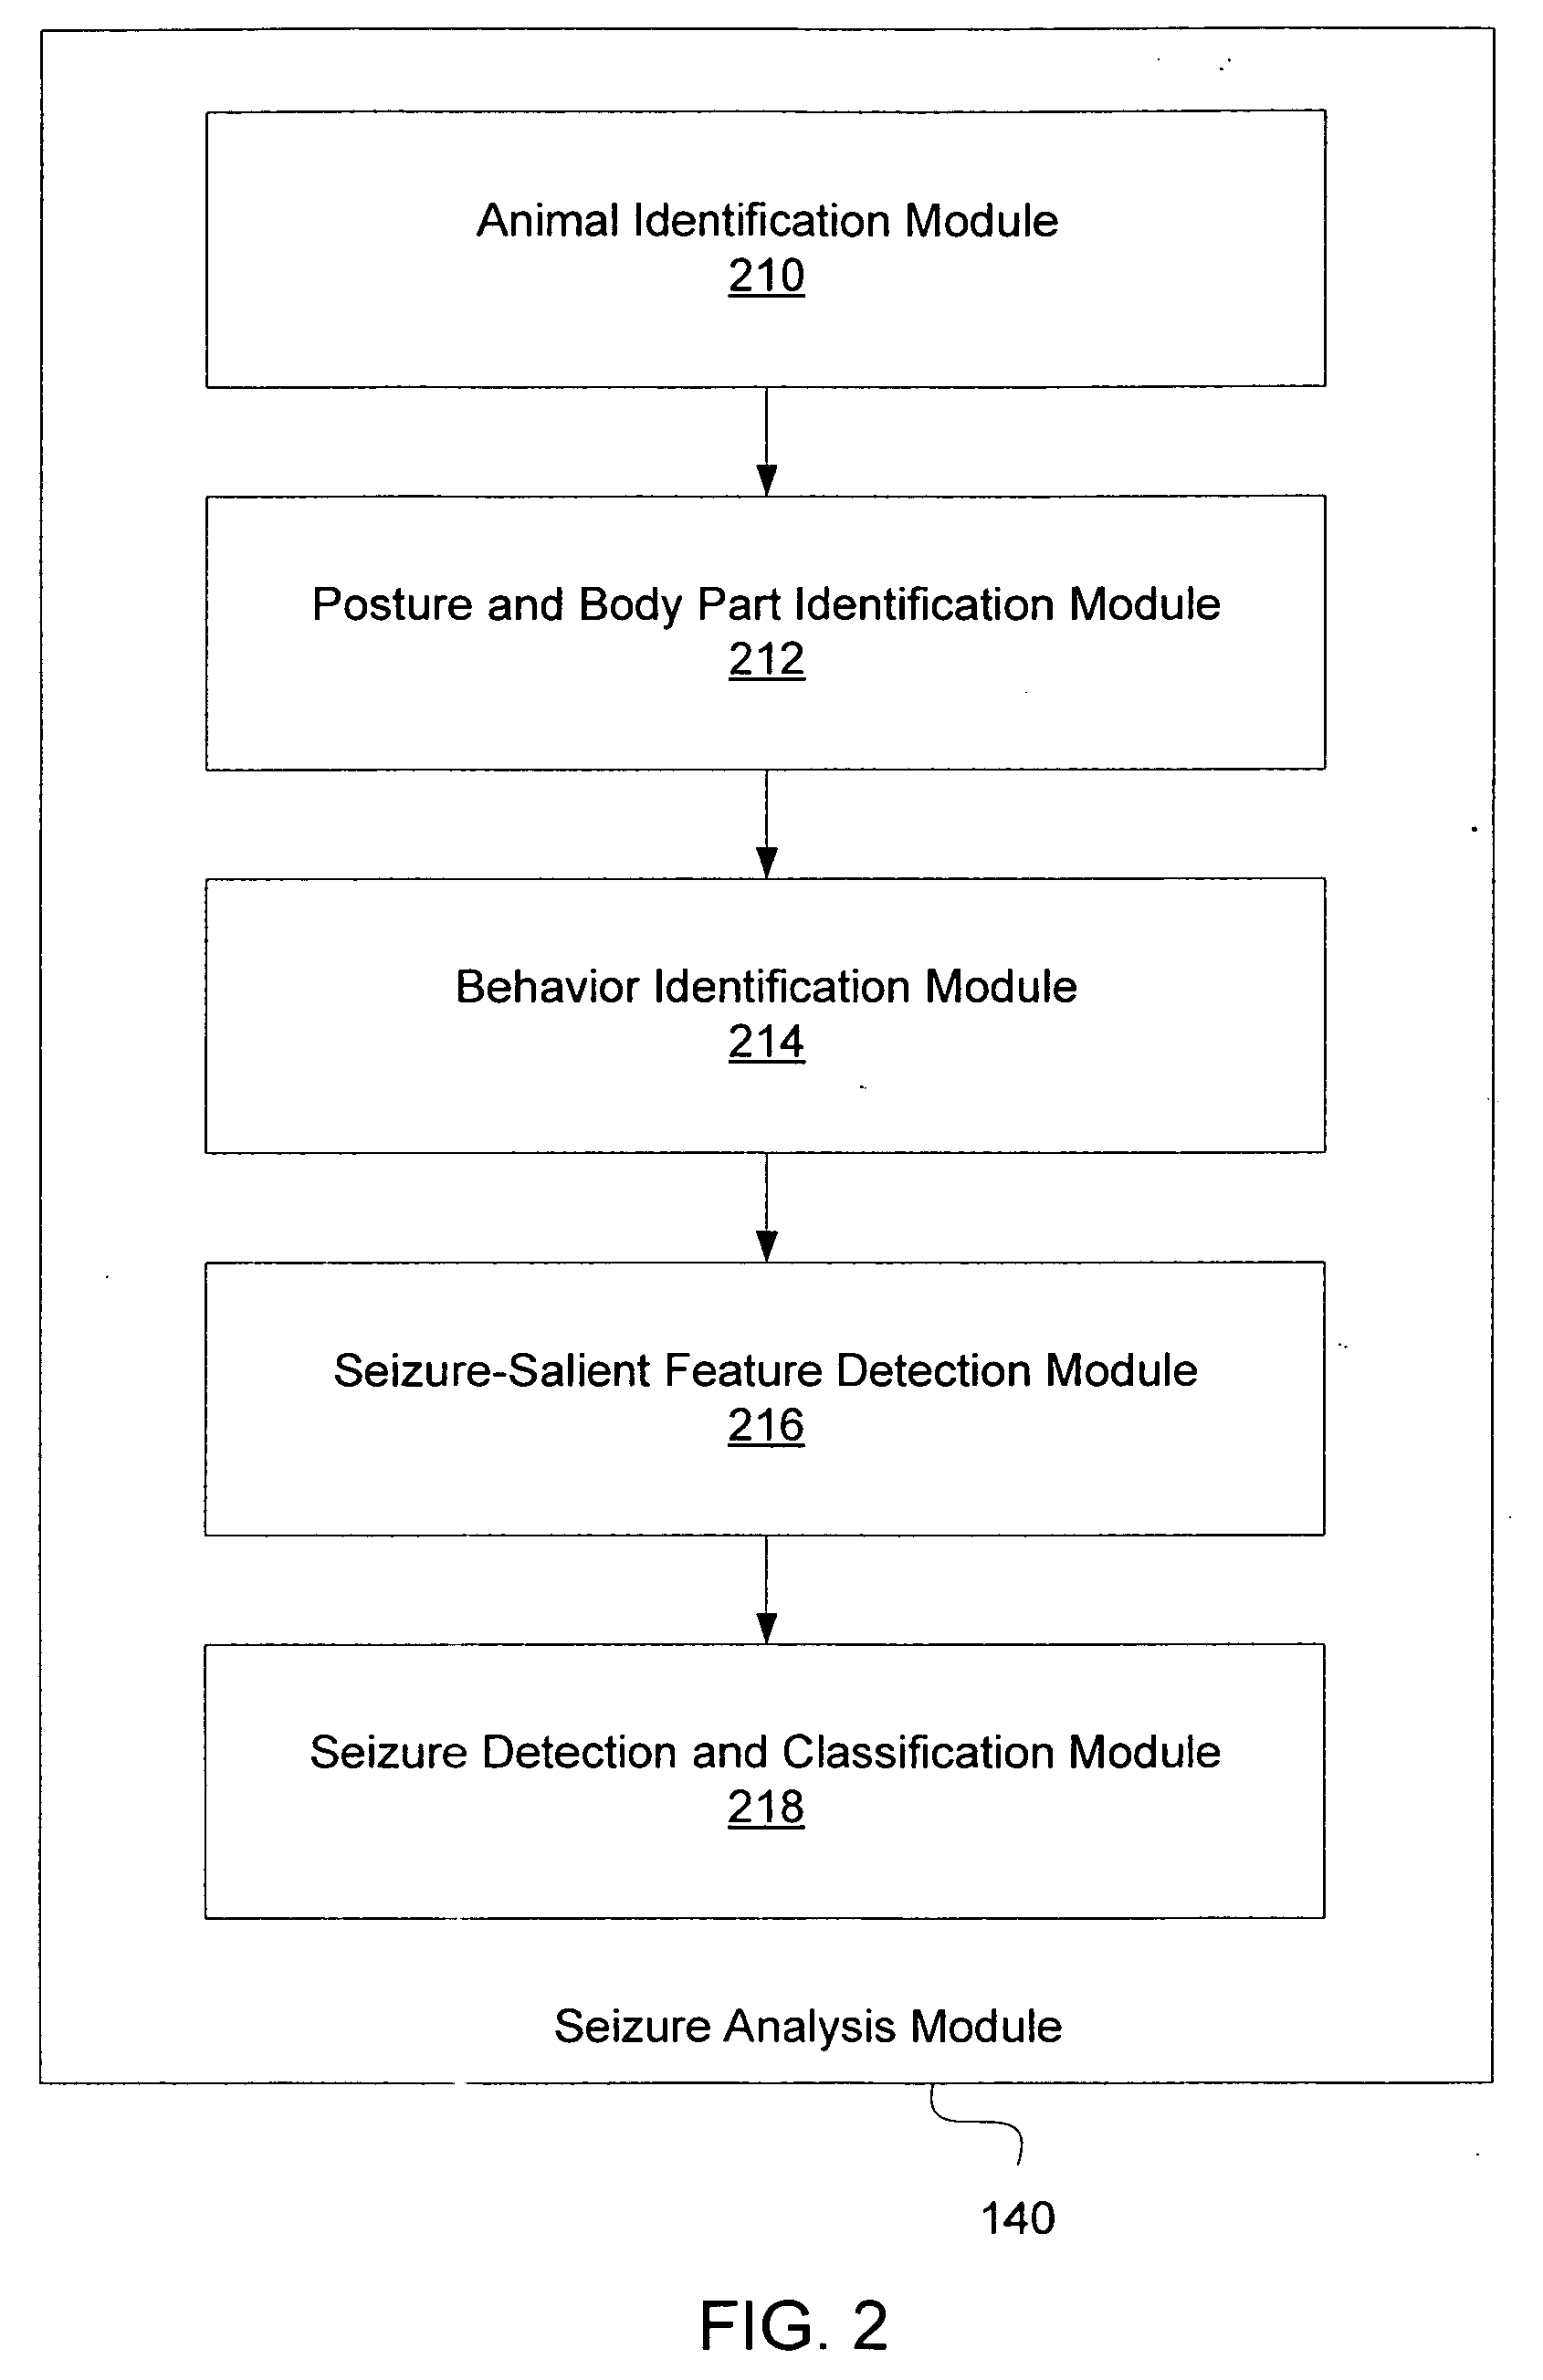 System and method for animal seizure detection and classification using video analysis